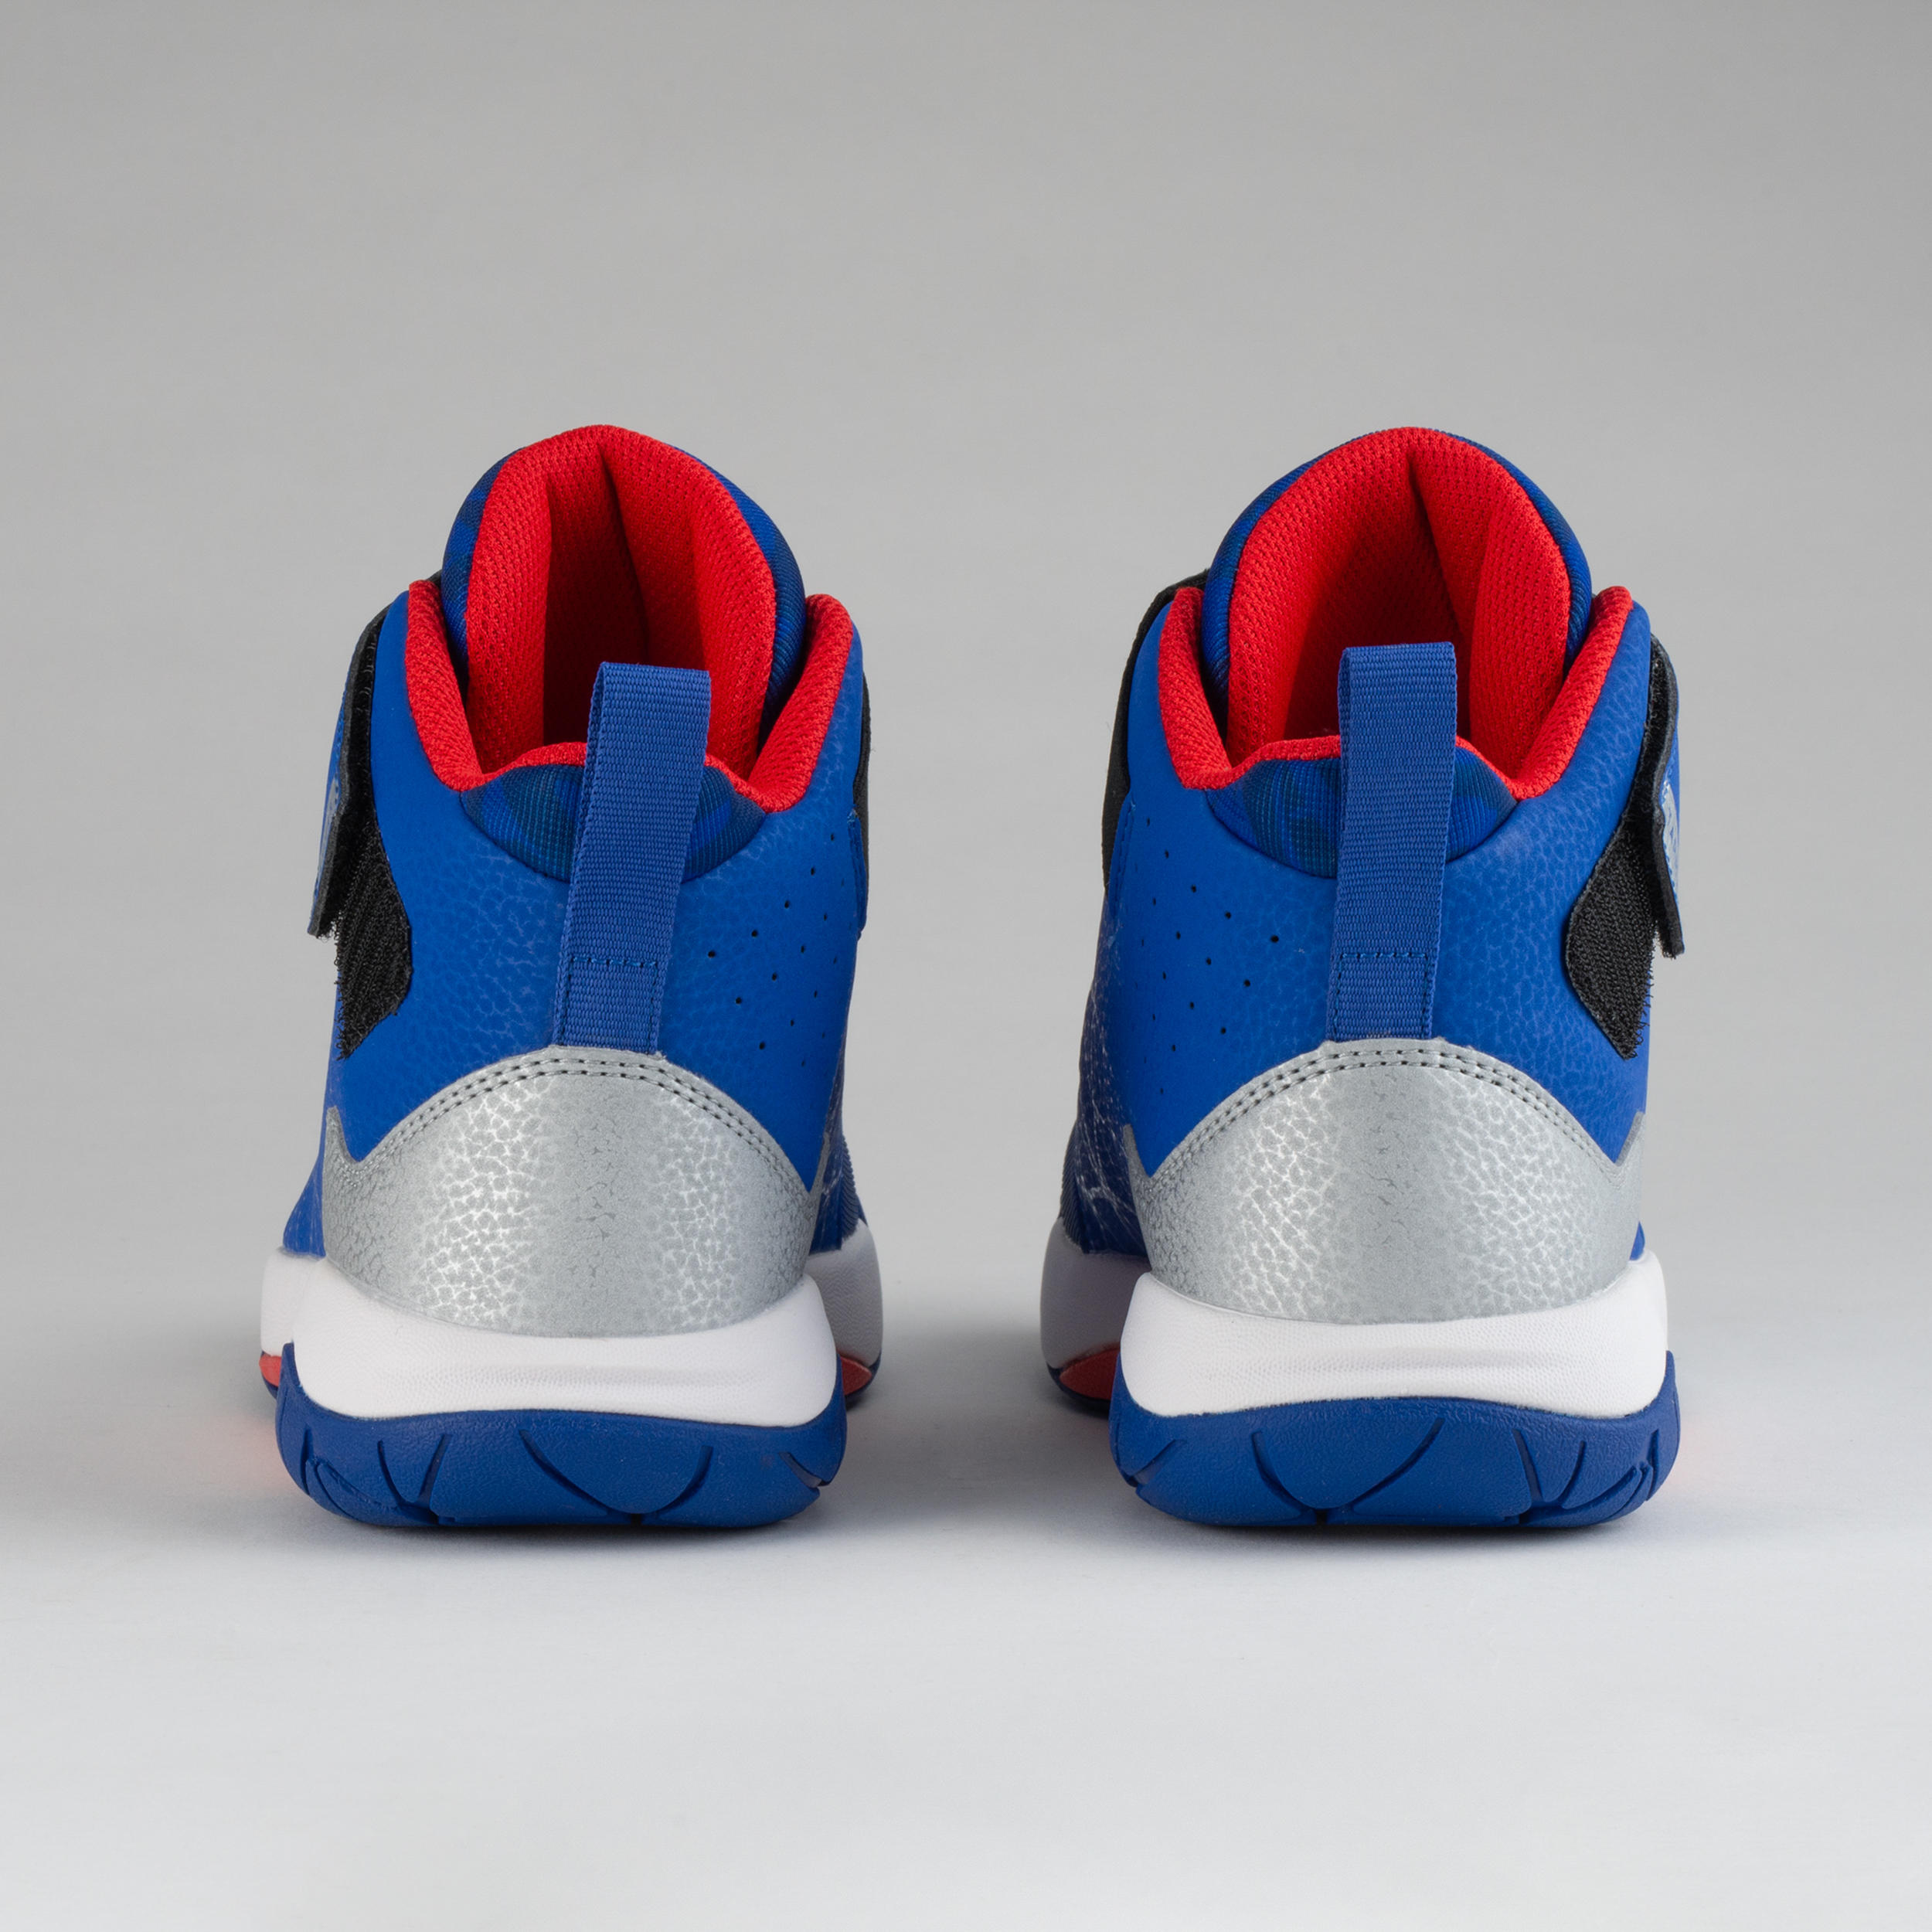 Boys'/Girls' Intermediate Basketball Shoes - Blue/Red Spider Lace 6/9